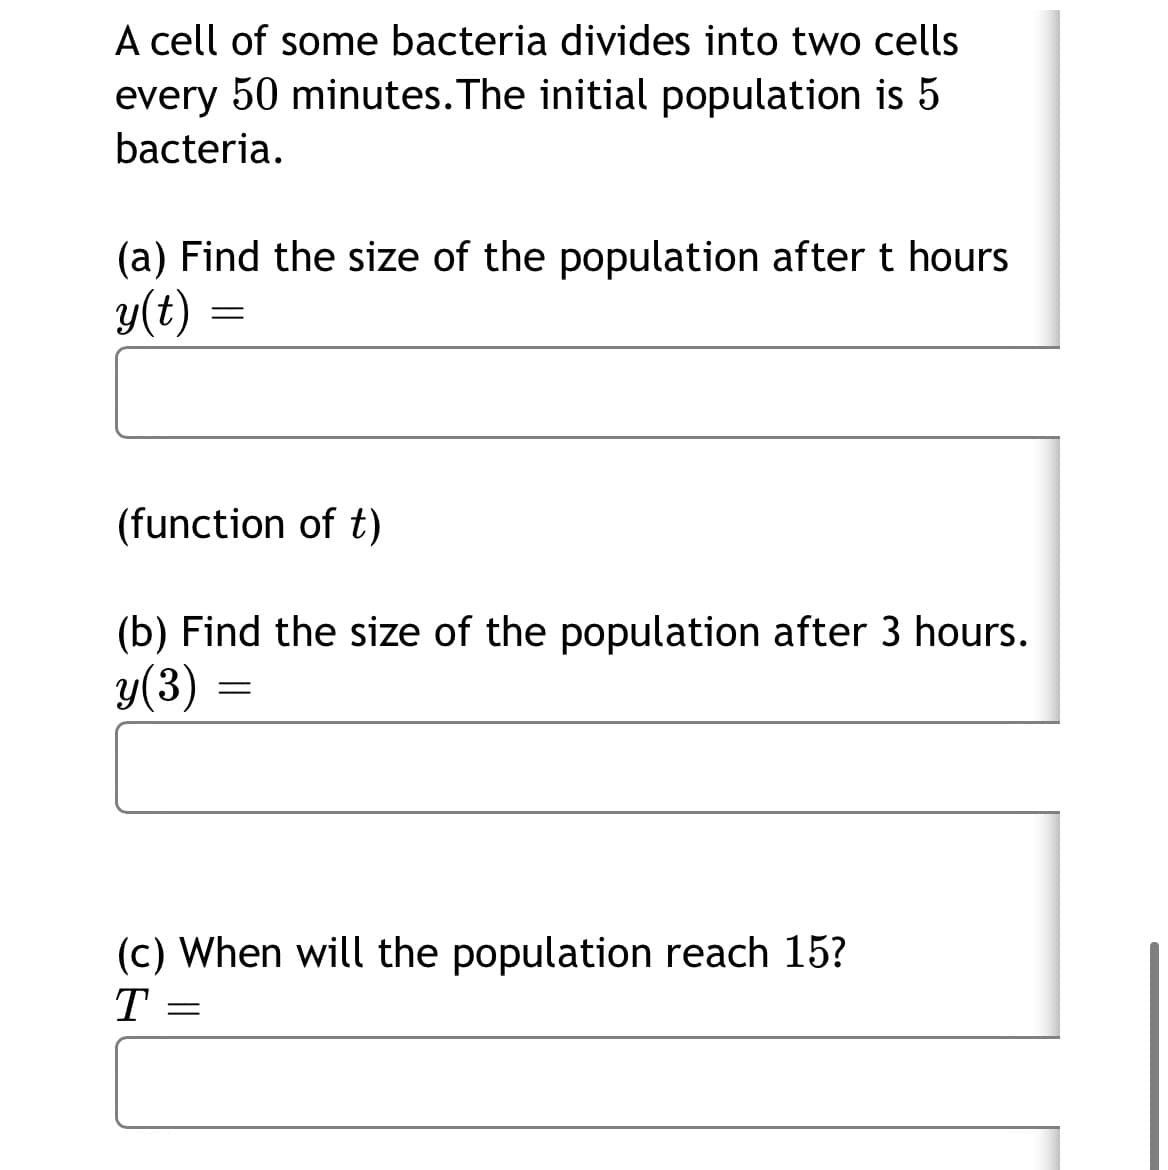 A cell of some bacteria divides into two cells
every 50 minutes. The initial population is 5
bacteria.
(a) Find the size of the population after t hours
y(t) =
(function of t)
(b) Find the size of the population after 3 hours.
y(3)
(c) When will the population reach 15?
T
